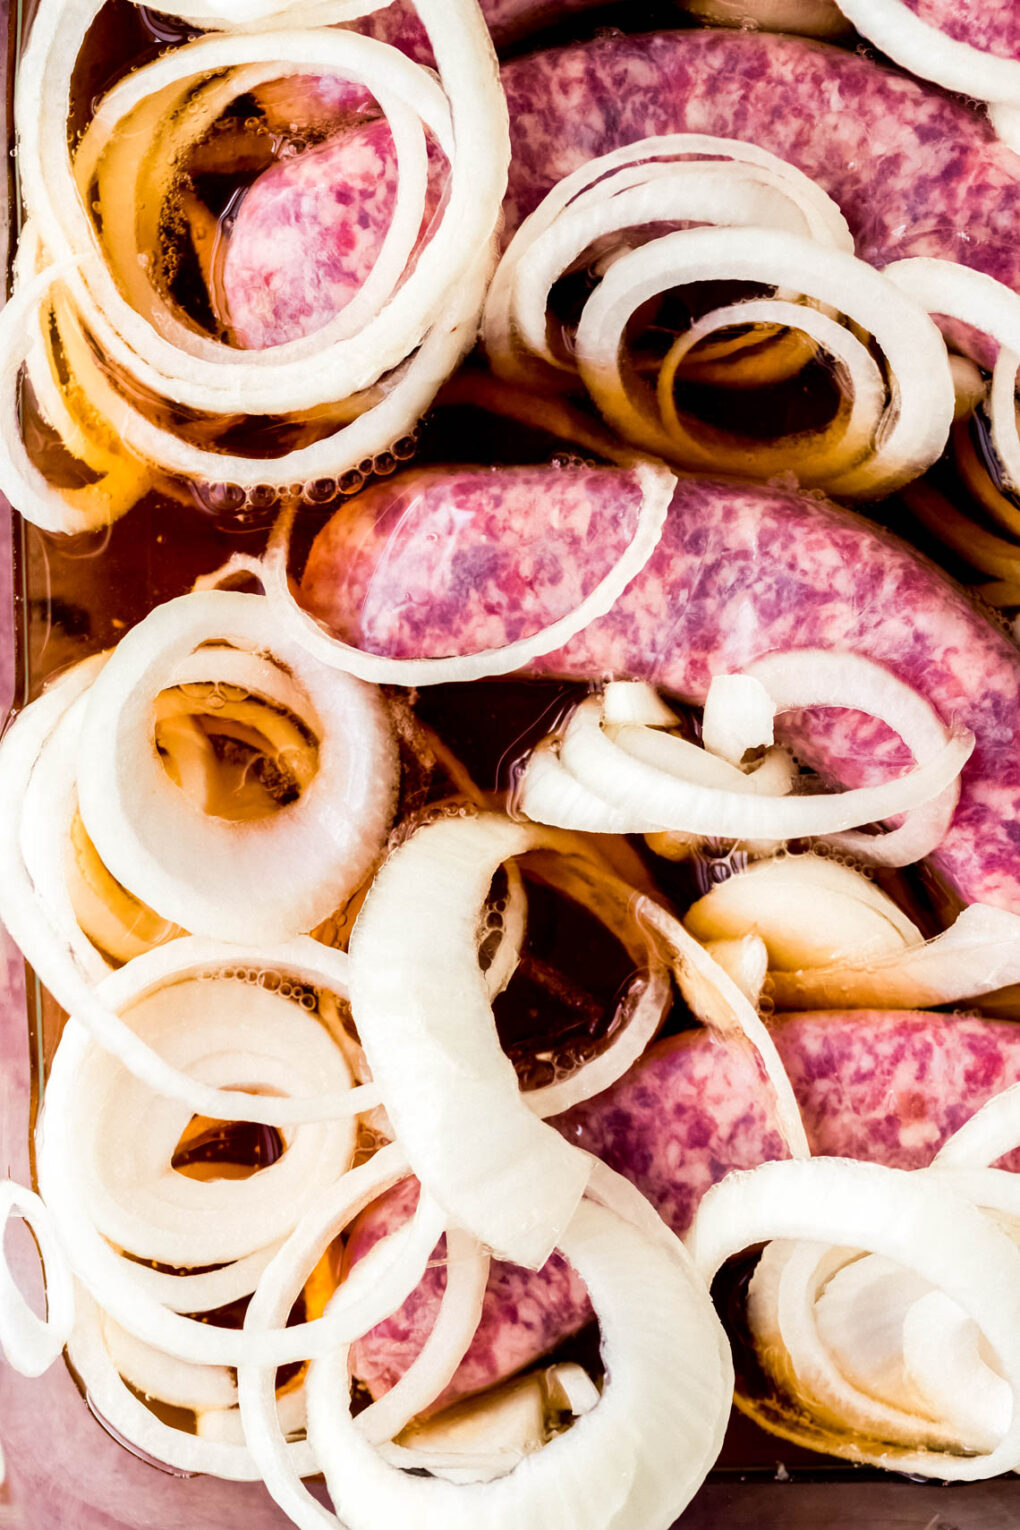 brats and onions marinating in beer